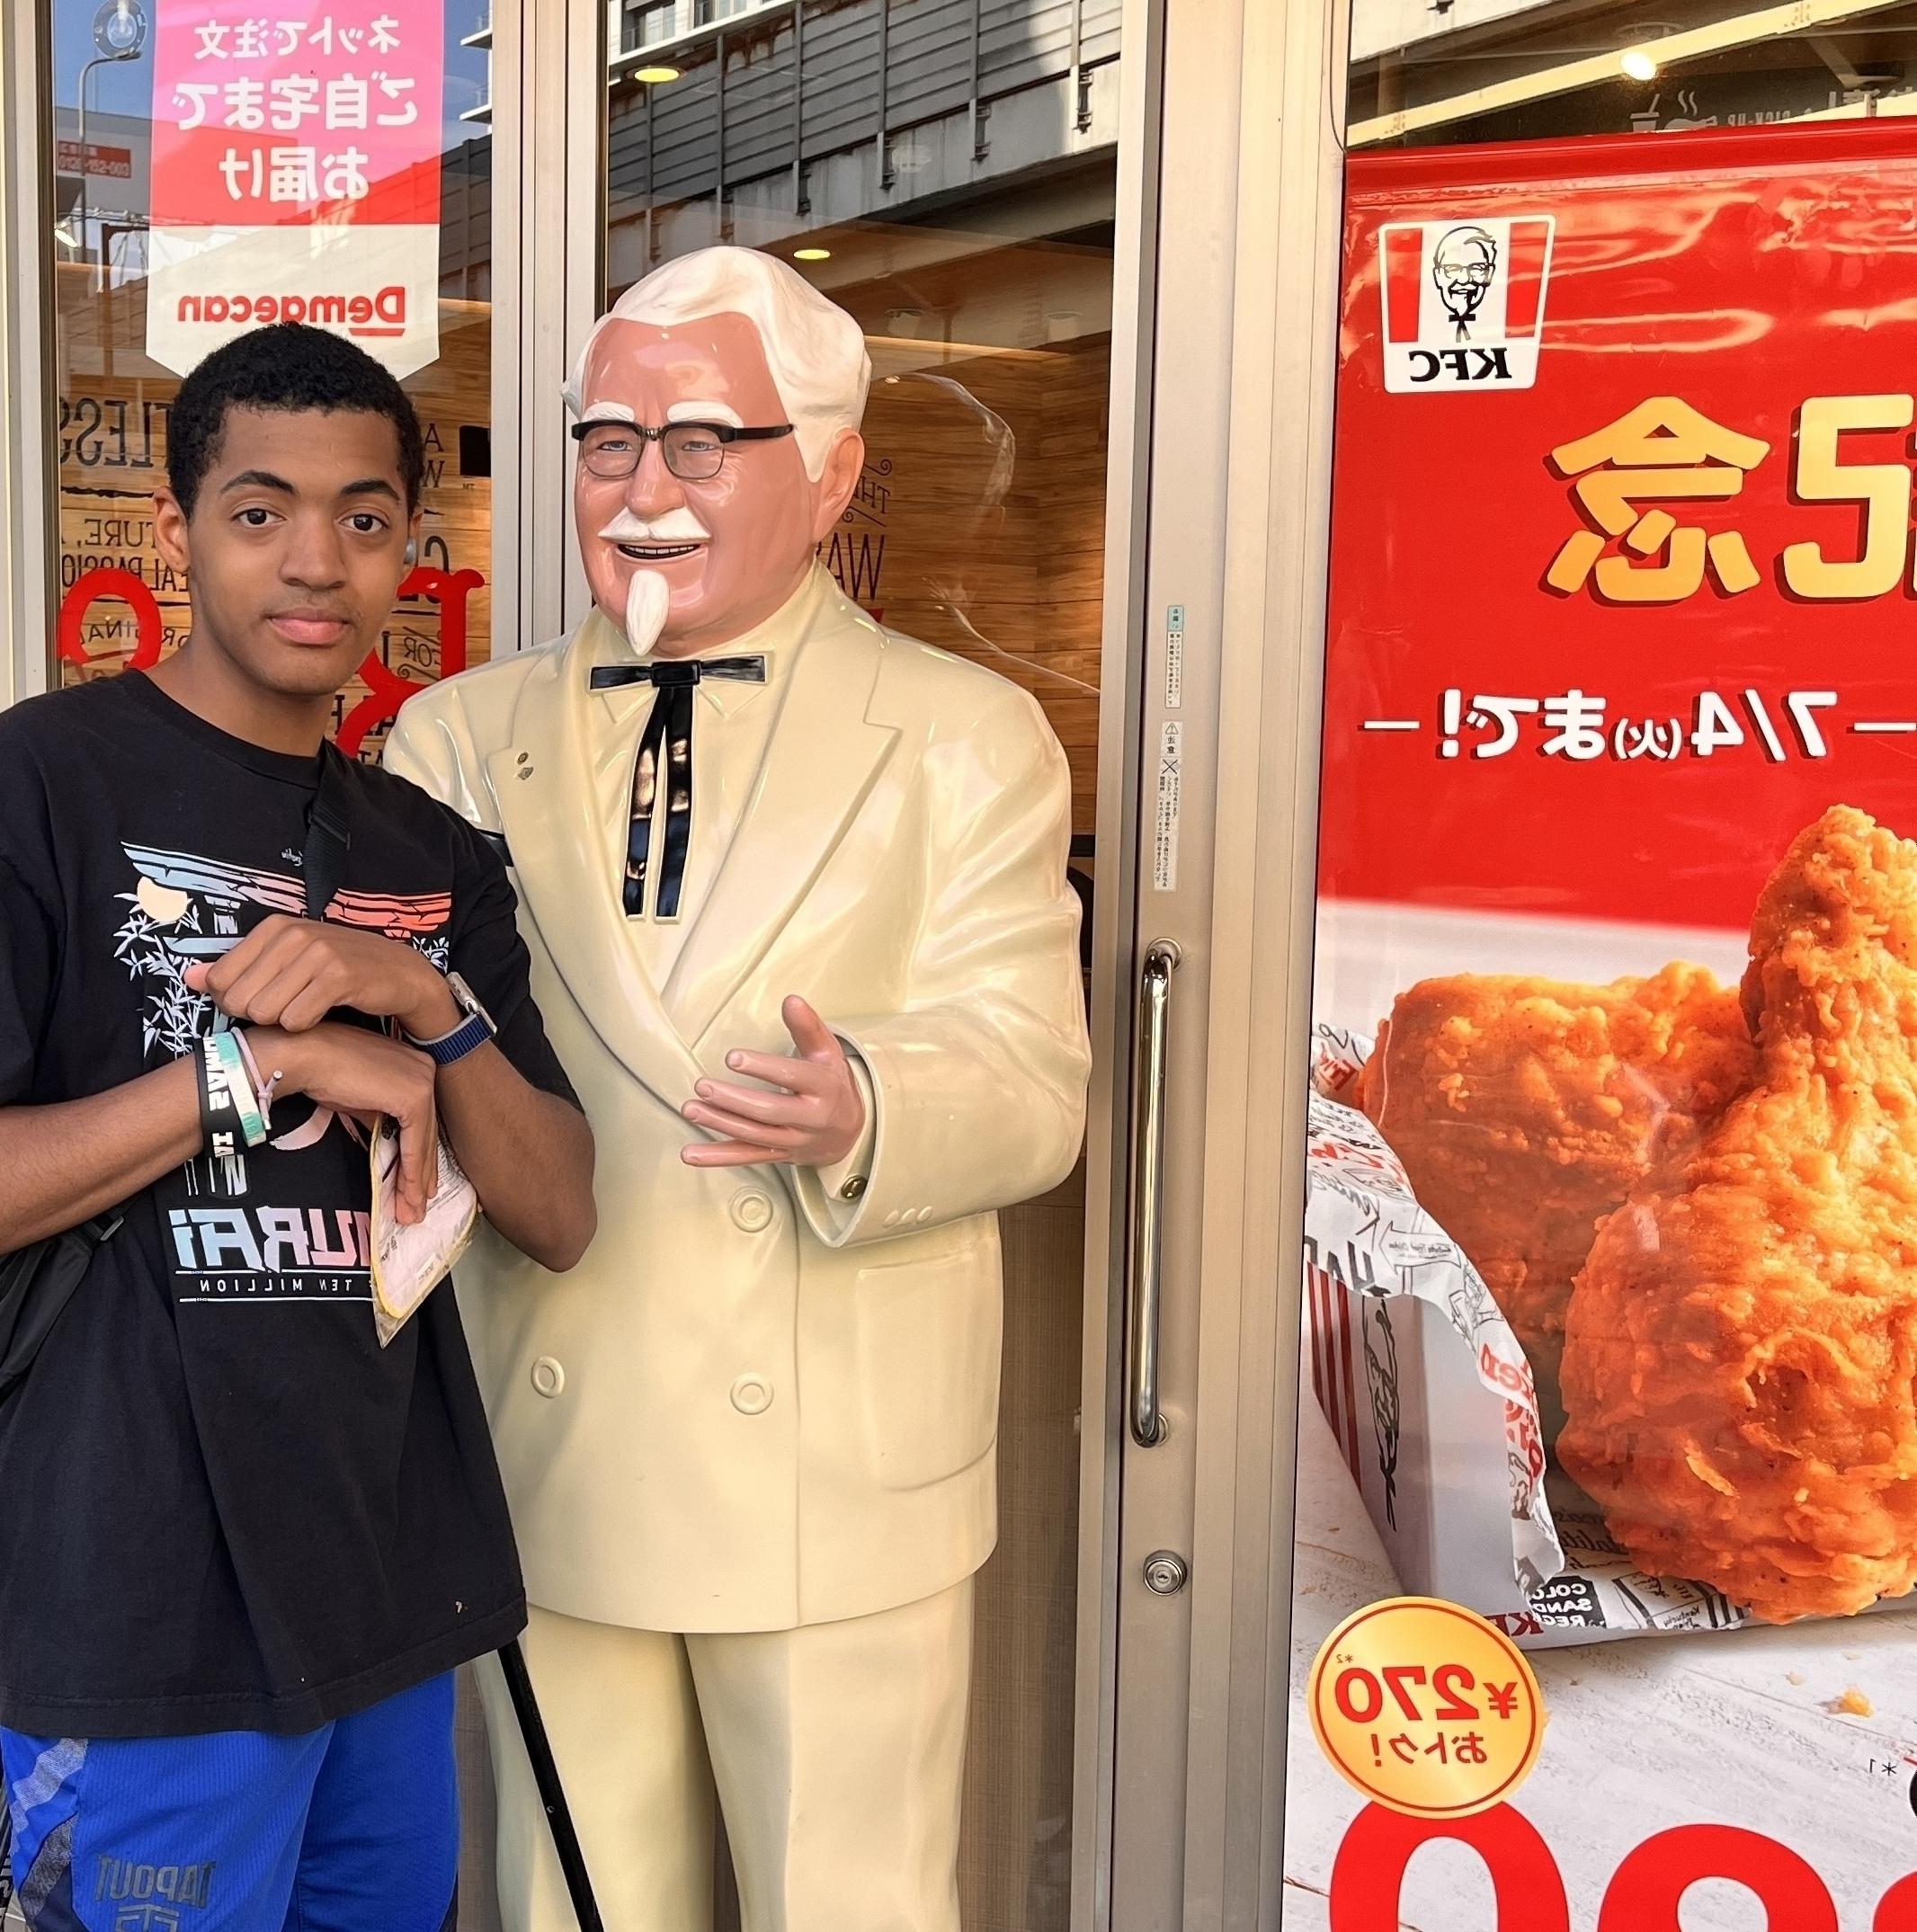 Hackney with KFC statue in 日本